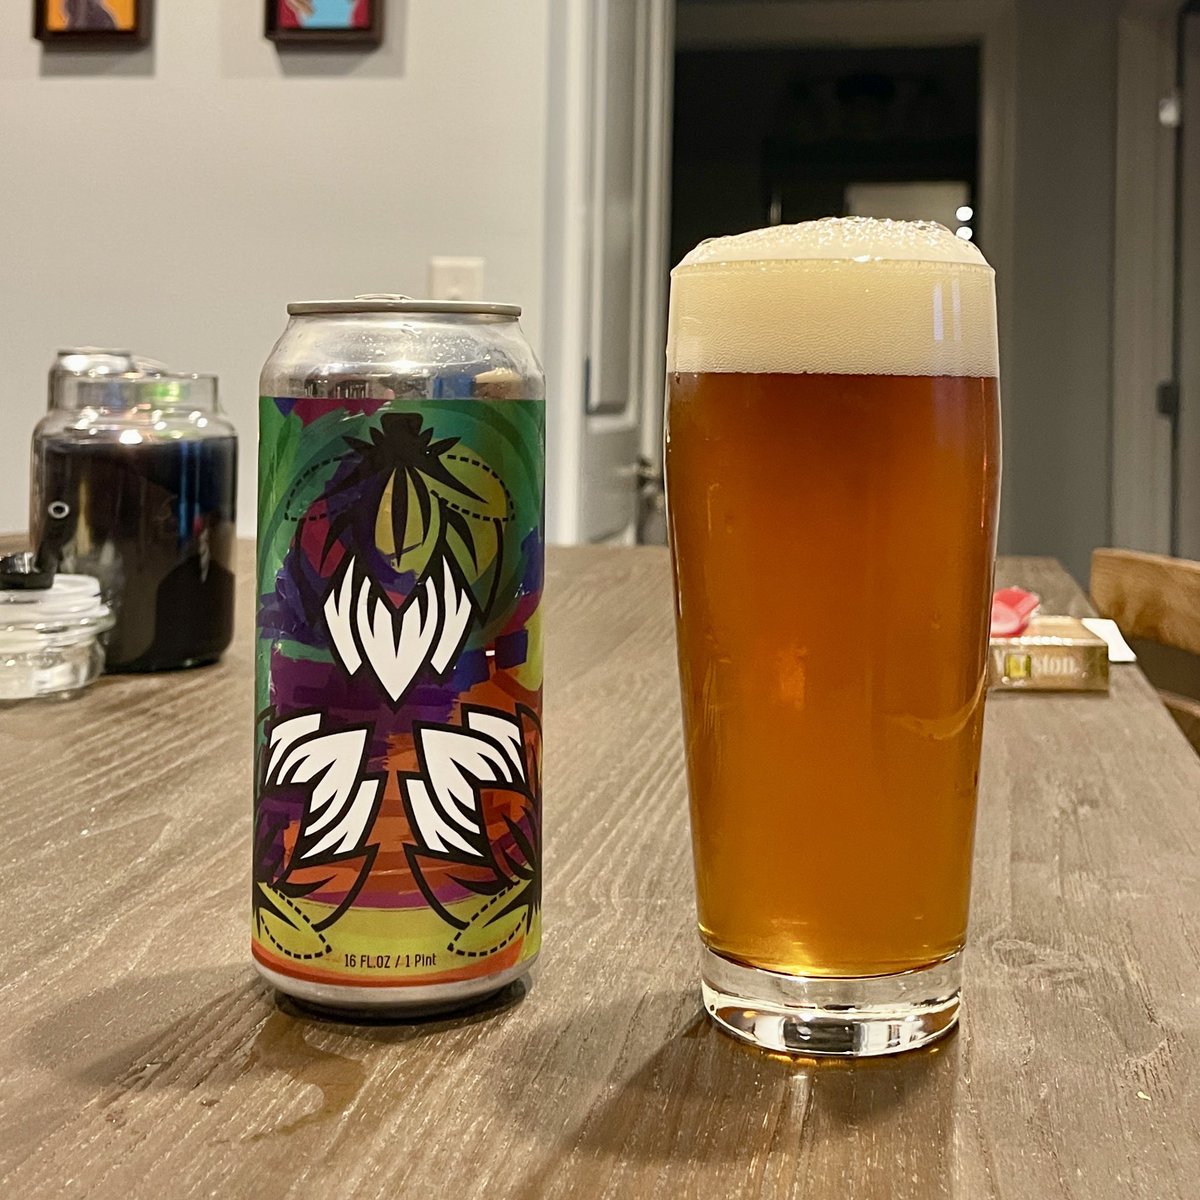 More and more and more, gimme all that @PhaseThreeBrew y’all. 😋 This triple banger has honey added to it, and while…Read more -> hopsmash.com 

#phasethreebrewing #chicagobeer #illinoisbeer #chicagocraftbeer #illinoiscraftbeer #tripleipa